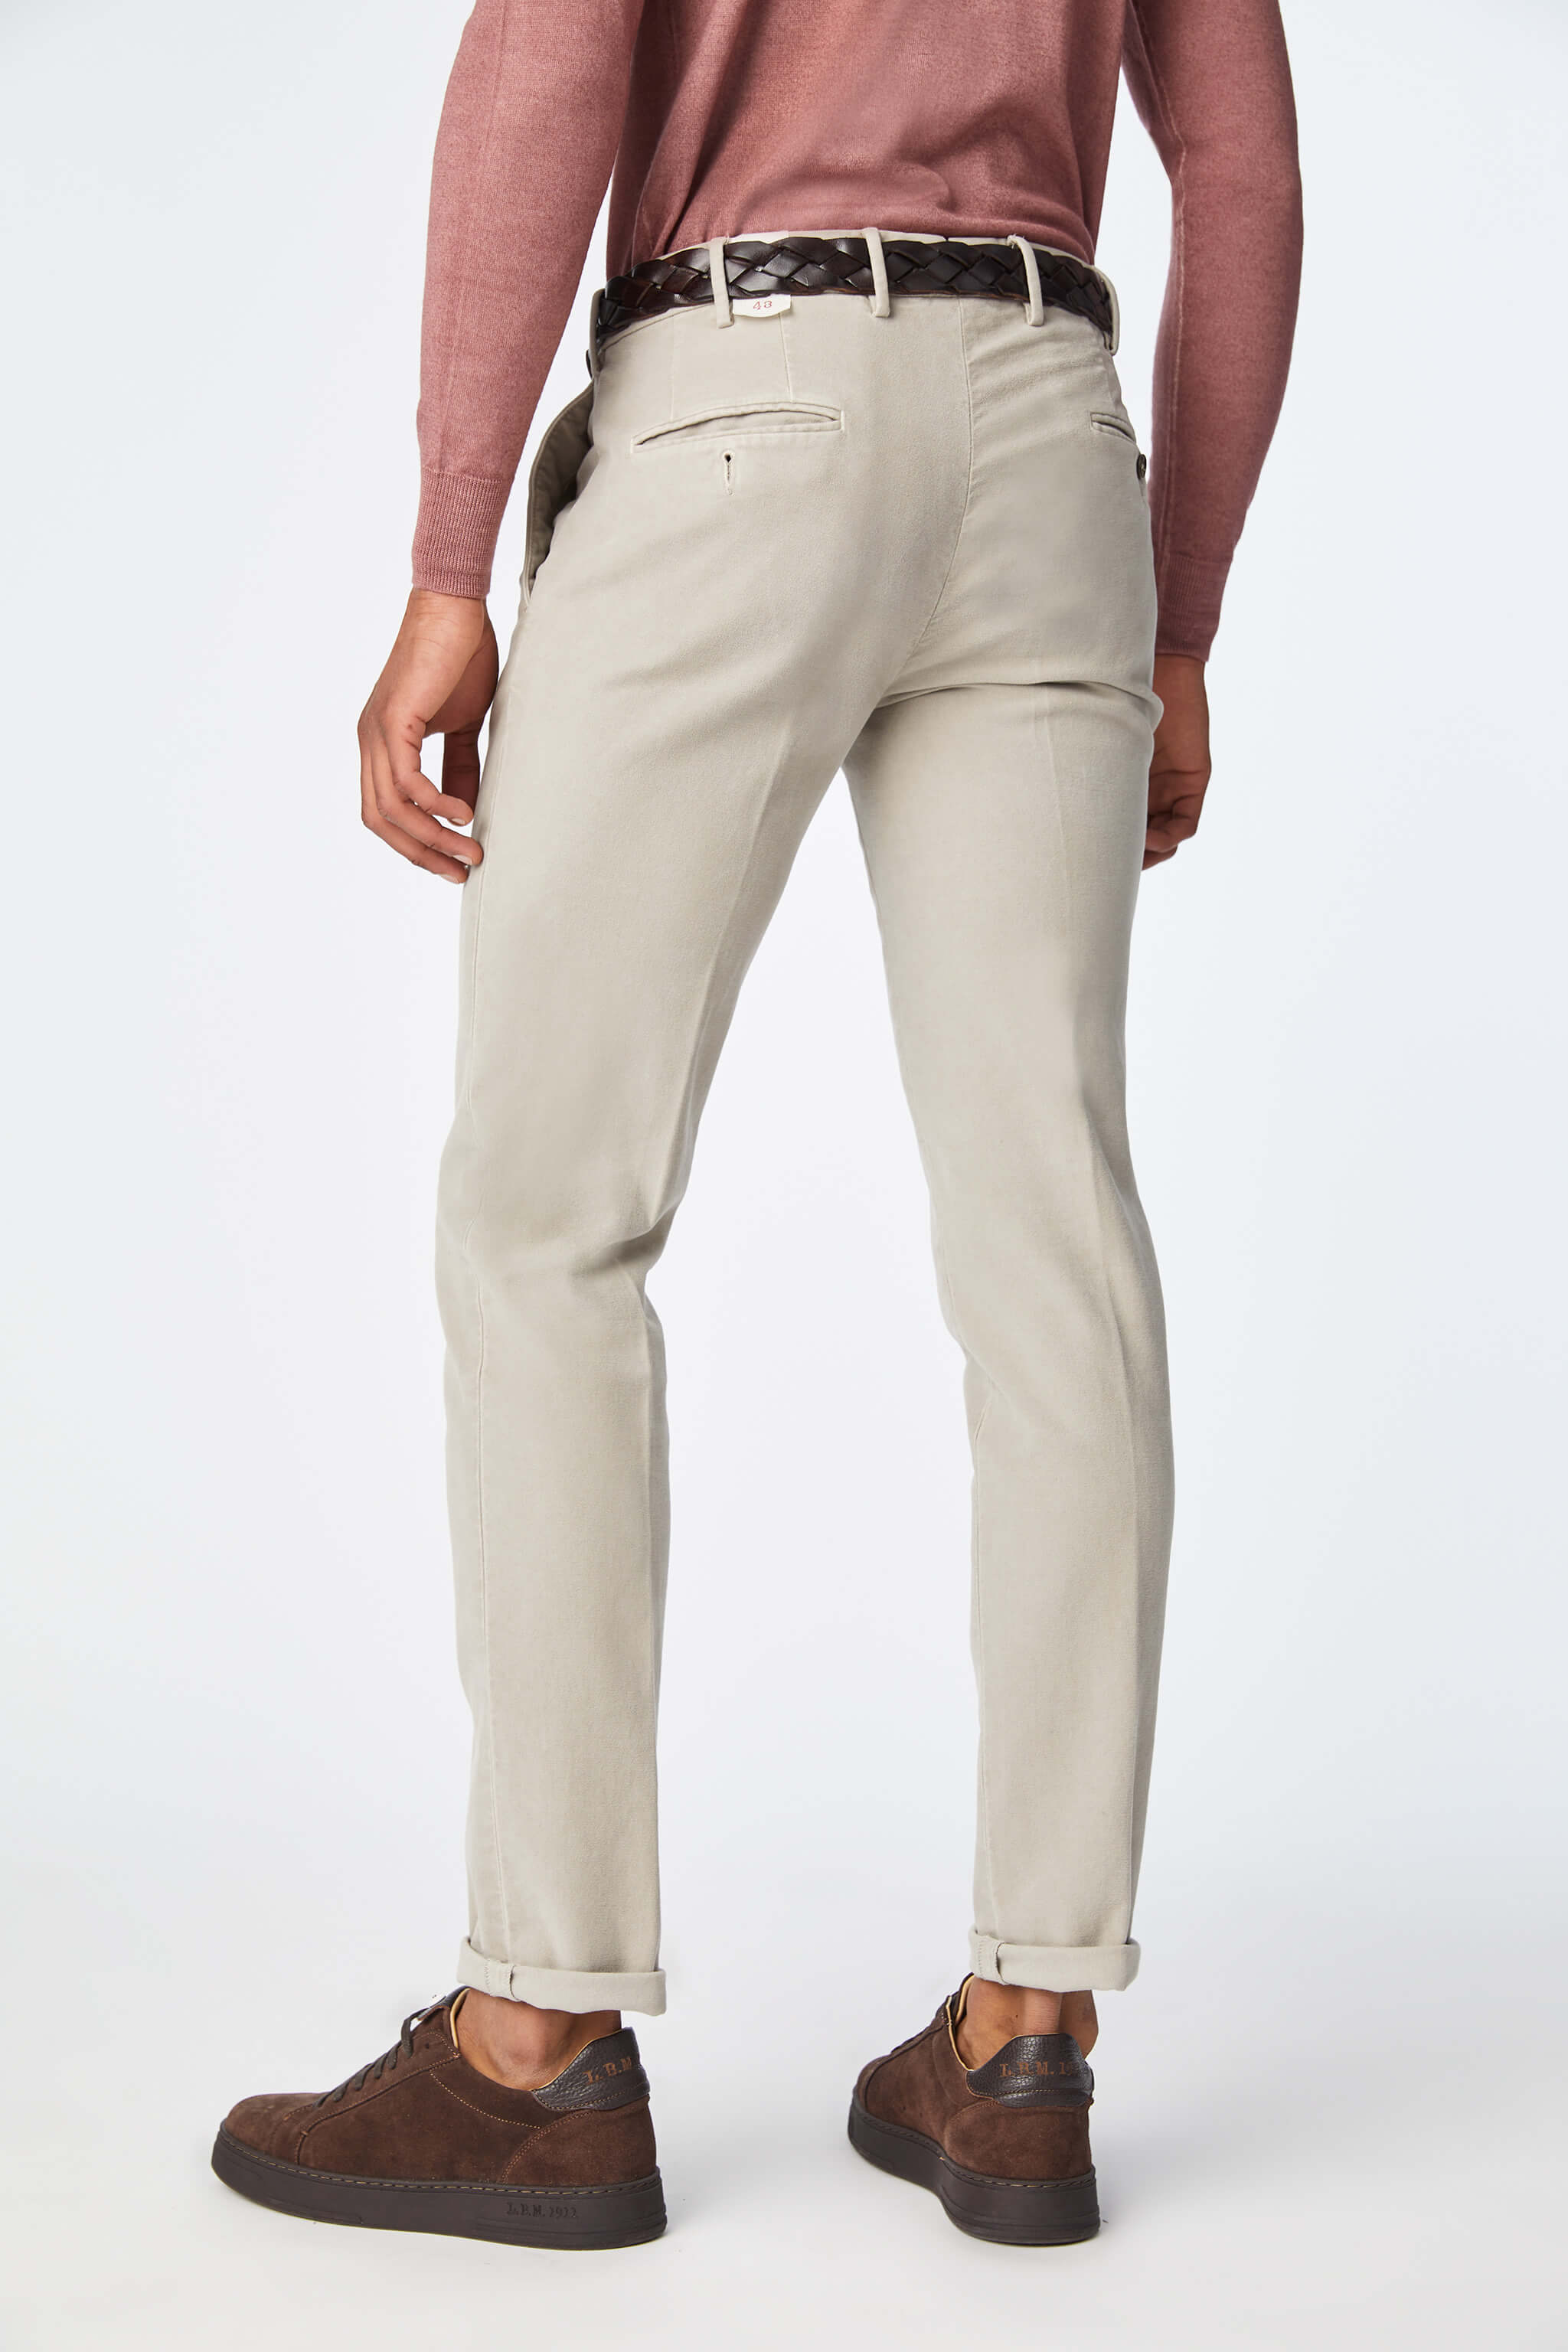 Garment-dyed RAY pants in ice gray